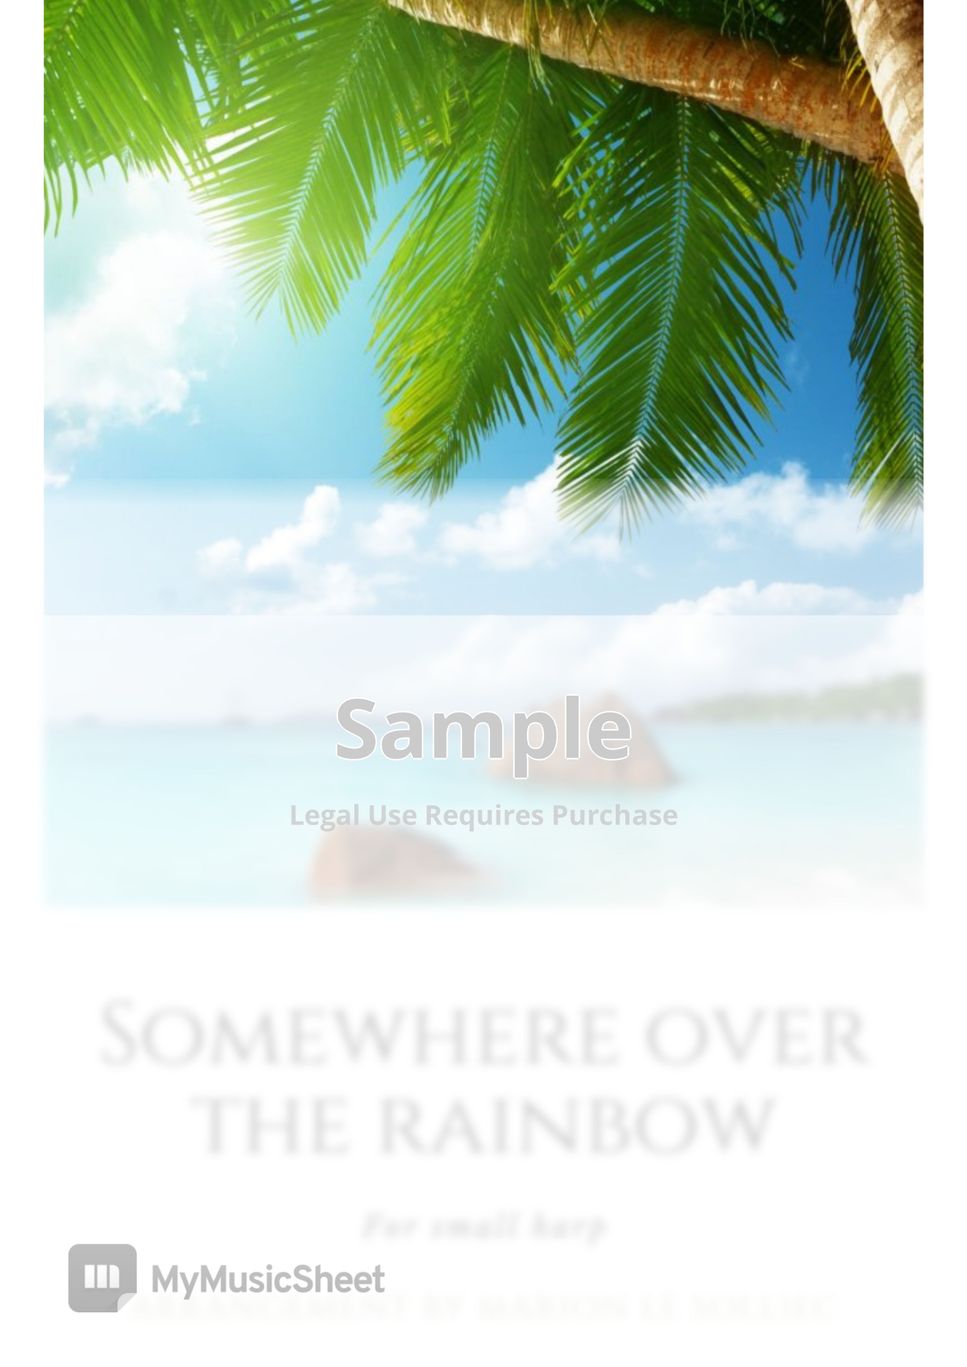 Somewhere - Over The Rainbow by Marion Le Solliec